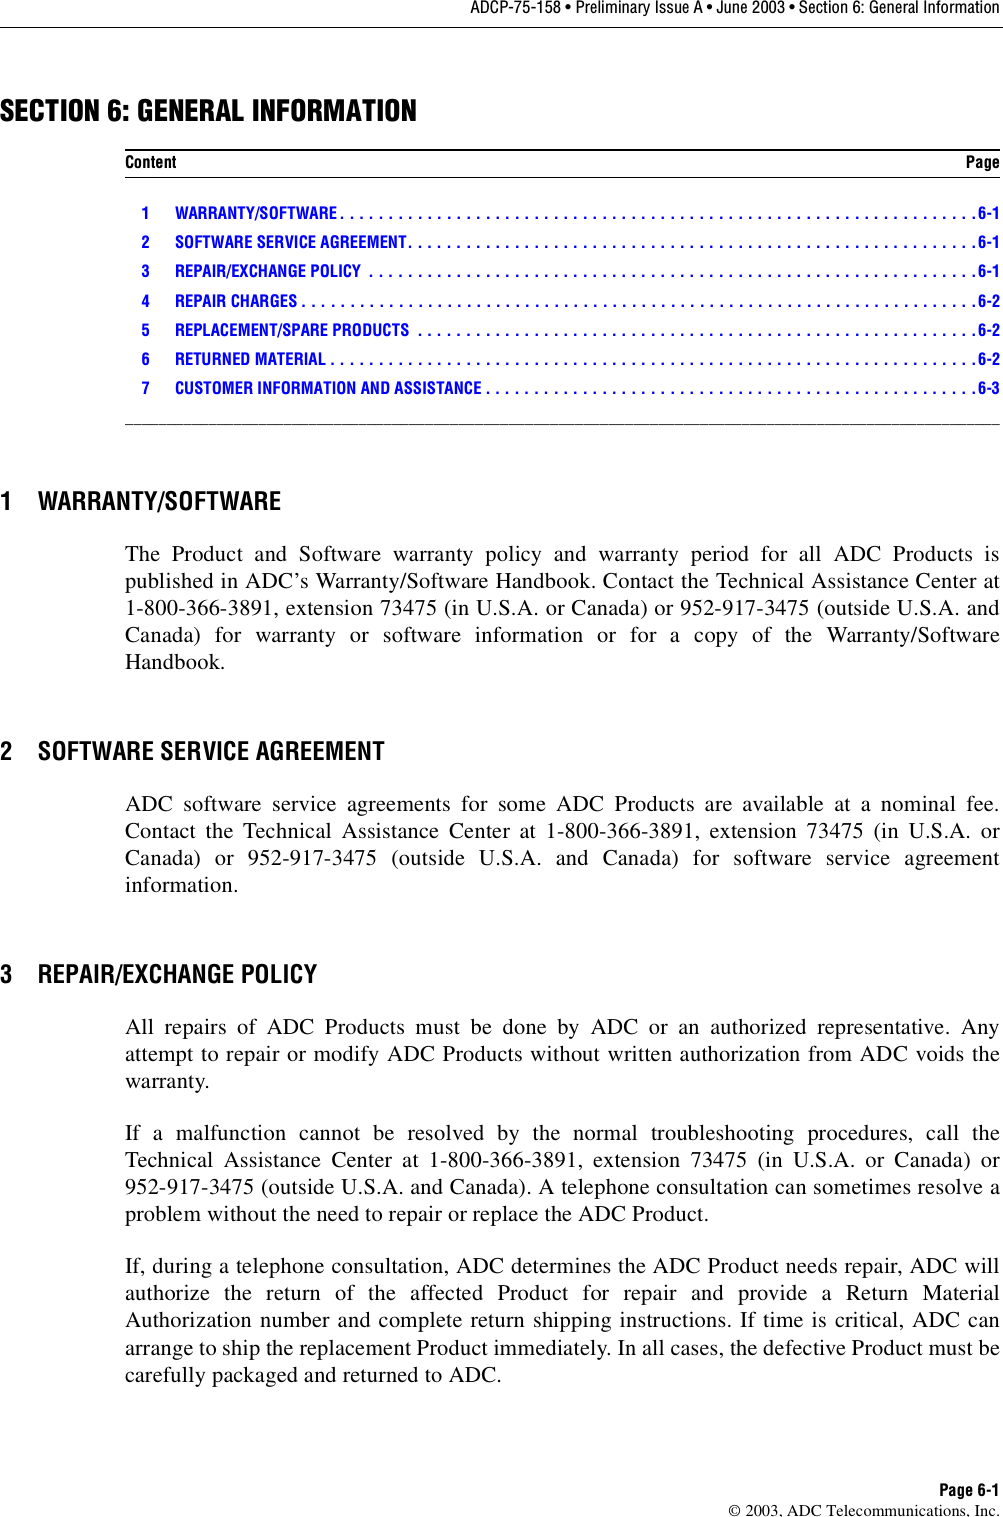 ADCP-75-158 • Preliminary Issue A • June 2003 • Section 6: General InformationPage 6-1© 2003, ADC Telecommunications, Inc.SECTION 6: GENERAL INFORMATION1 WARRANTY/SOFTWARE . . . . . . . . . . . . . . . . . . . . . . . . . . . . . . . . . . . . . . . . . . . . . . . . . . . . . . . . . . . . . . . . . .6-12 SOFTWARE SERVICE AGREEMENT. . . . . . . . . . . . . . . . . . . . . . . . . . . . . . . . . . . . . . . . . . . . . . . . . . . . . . . . . . .6-13 REPAIR/EXCHANGE POLICY  . . . . . . . . . . . . . . . . . . . . . . . . . . . . . . . . . . . . . . . . . . . . . . . . . . . . . . . . . . . . . . .6-14 REPAIR CHARGES . . . . . . . . . . . . . . . . . . . . . . . . . . . . . . . . . . . . . . . . . . . . . . . . . . . . . . . . . . . . . . . . . . . . . .6-25 REPLACEMENT/SPARE PRODUCTS  . . . . . . . . . . . . . . . . . . . . . . . . . . . . . . . . . . . . . . . . . . . . . . . . . . . . . . . . . .6-26 RETURNED MATERIAL . . . . . . . . . . . . . . . . . . . . . . . . . . . . . . . . . . . . . . . . . . . . . . . . . . . . . . . . . . . . . . . . . . .6-27 CUSTOMER INFORMATION AND ASSISTANCE . . . . . . . . . . . . . . . . . . . . . . . . . . . . . . . . . . . . . . . . . . . . . . . . . . .6-3_________________________________________________________________________________________________________1 WARRANTY/SOFTWAREThe Product and Software warranty policy and warranty period for all ADC Products ispublished in ADC’s Warranty/Software Handbook. Contact the Technical Assistance Center at1-800-366-3891, extension 73475 (in U.S.A. or Canada) or 952-917-3475 (outside U.S.A. andCanada) for warranty or software information or for a copy of the Warranty/SoftwareHandbook.2 SOFTWARE SERVICE AGREEMENTADC software service agreements for some ADC Products are available at a nominal fee.Contact the Technical Assistance Center at 1-800-366-3891, extension 73475 (in U.S.A. orCanada) or 952-917-3475 (outside U.S.A. and Canada) for software service agreementinformation.3 REPAIR/EXCHANGE POLICYAll repairs of ADC Products must be done by ADC or an authorized representative. Anyattempt to repair or modify ADC Products without written authorization from ADC voids thewarranty.If a malfunction cannot be resolved by the normal troubleshooting procedures, call theTechnical Assistance Center at 1-800-366-3891, extension 73475 (in U.S.A. or Canada) or952-917-3475 (outside U.S.A. and Canada). A telephone consultation can sometimes resolve aproblem without the need to repair or replace the ADC Product.If, during a telephone consultation, ADC determines the ADC Product needs repair, ADC willauthorize the return of the affected Product for repair and provide a Return MaterialAuthorization number and complete return shipping instructions. If time is critical, ADC canarrange to ship the replacement Product immediately. In all cases, the defective Product must becarefully packaged and returned to ADC.Content Page